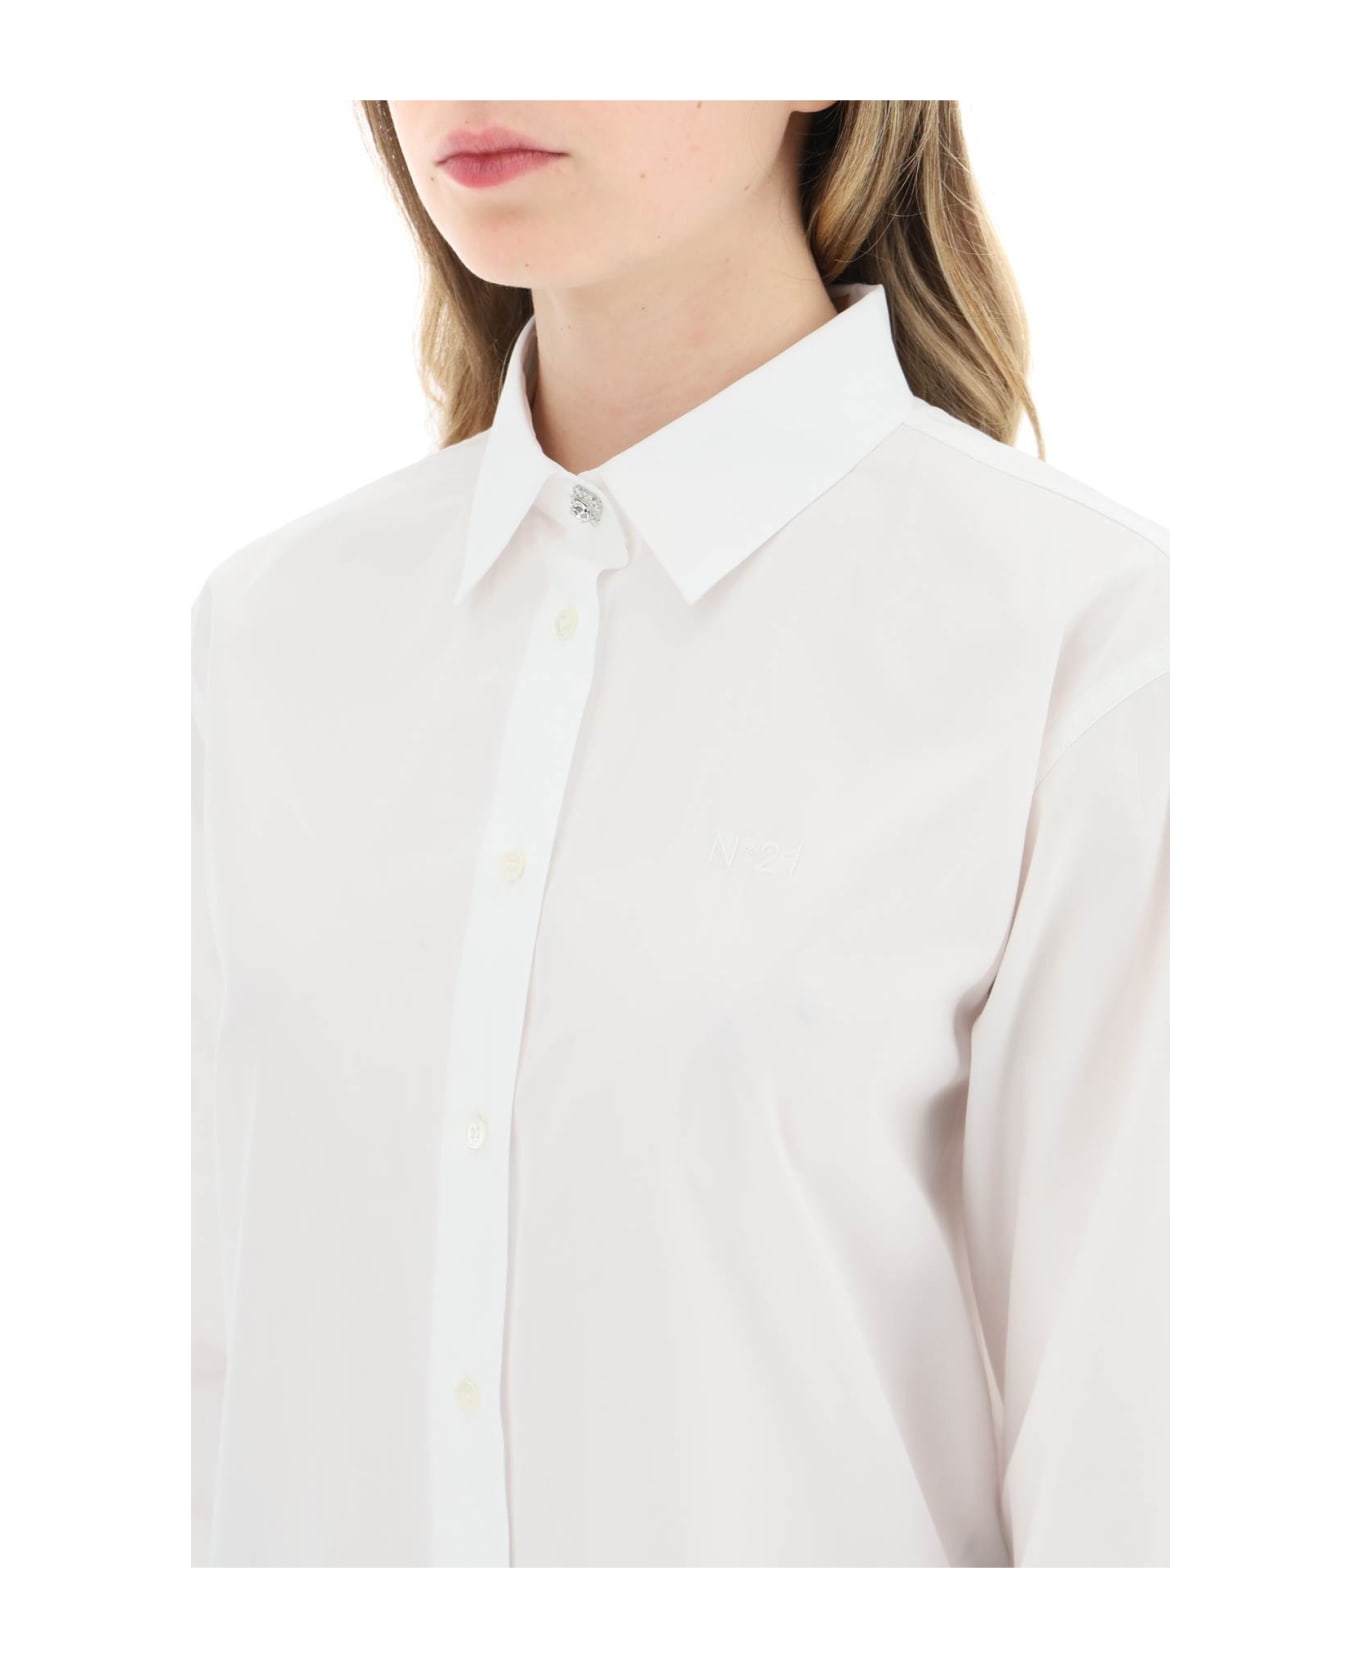 N.21 Shirt With Jewel Buttons - BIANCO OTTICO (White)